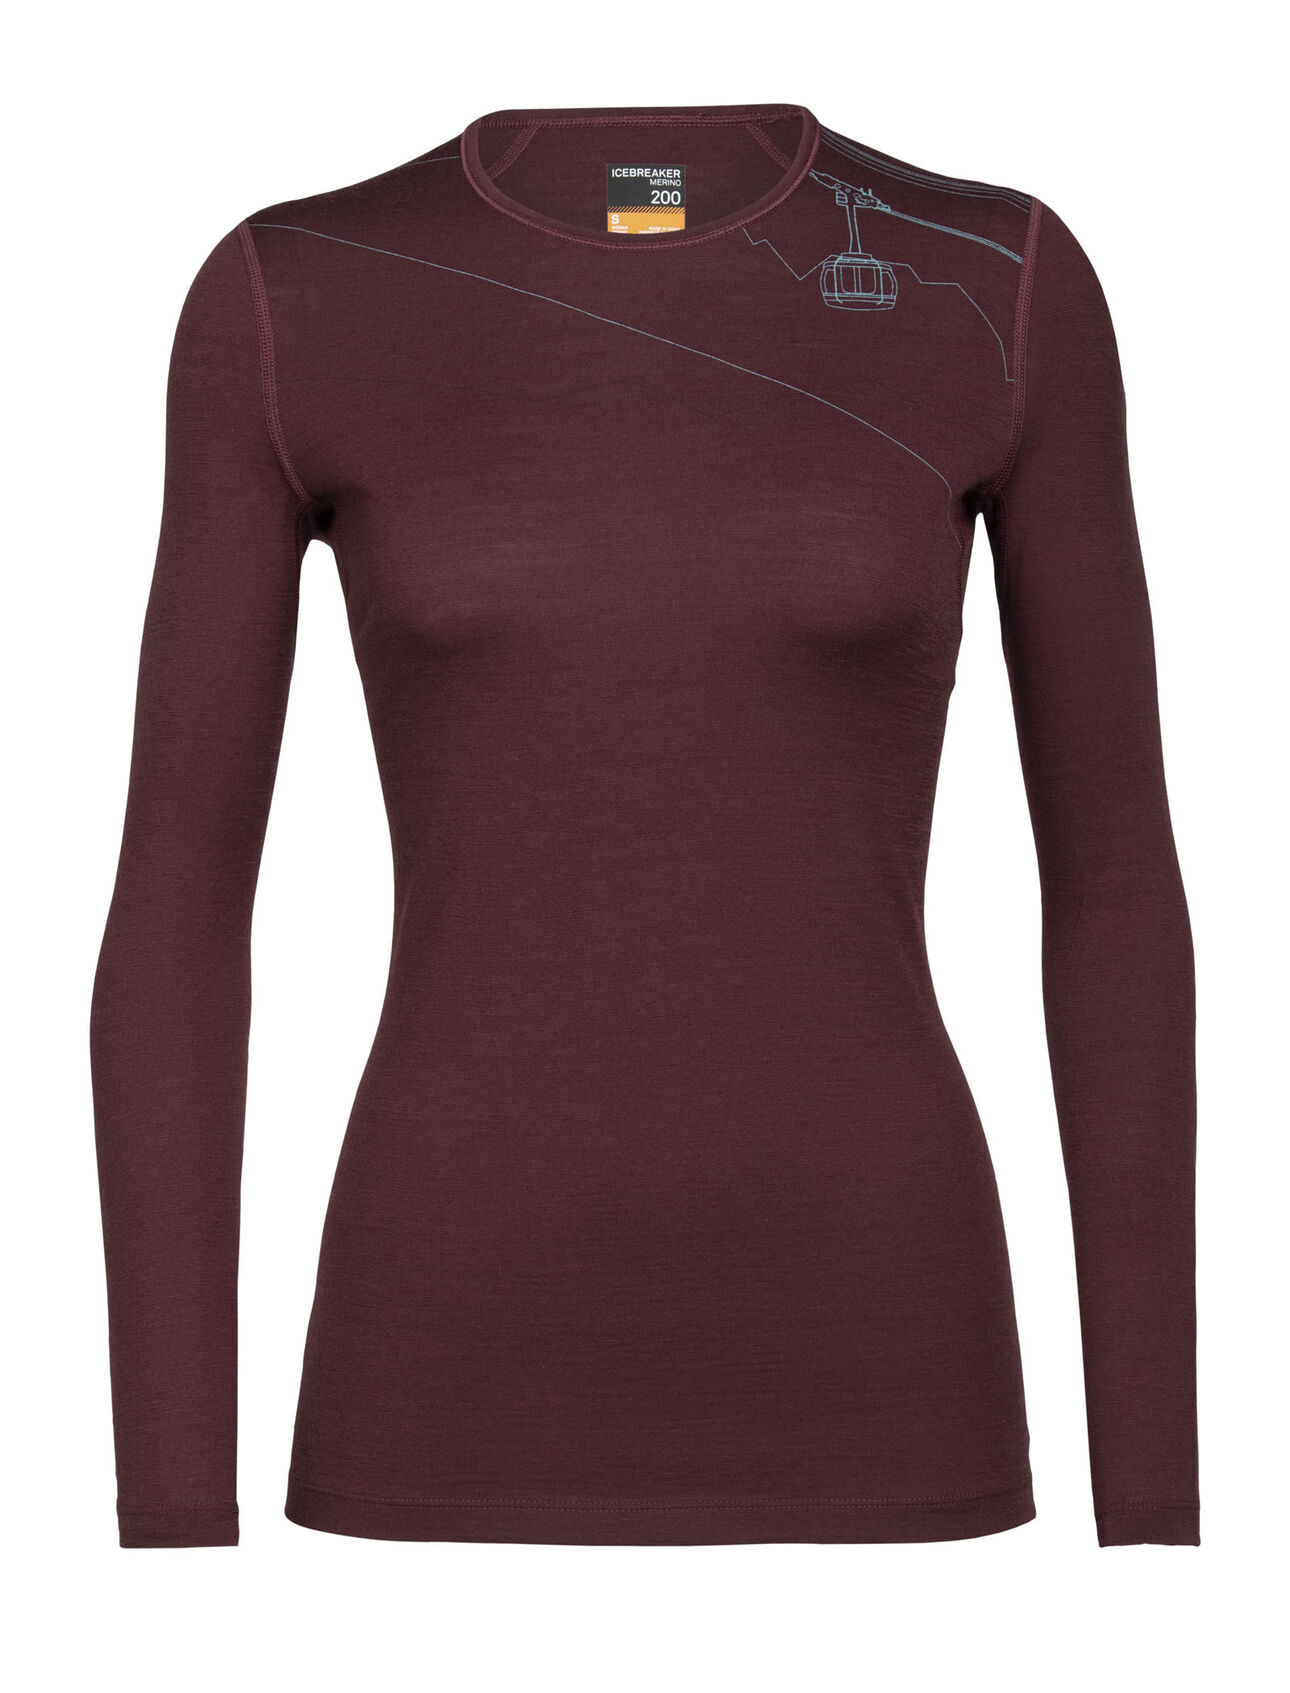 Womens Merino 200 Oasis Long Sleeve Crewe Thermal Top Skyway Lift Our versatile, go-anywhere shirt made from breathable 100% merino wool jersey, the 200 Oasis Long Sleeve Crewe Skyway Lift is our best-selling base layer top. 